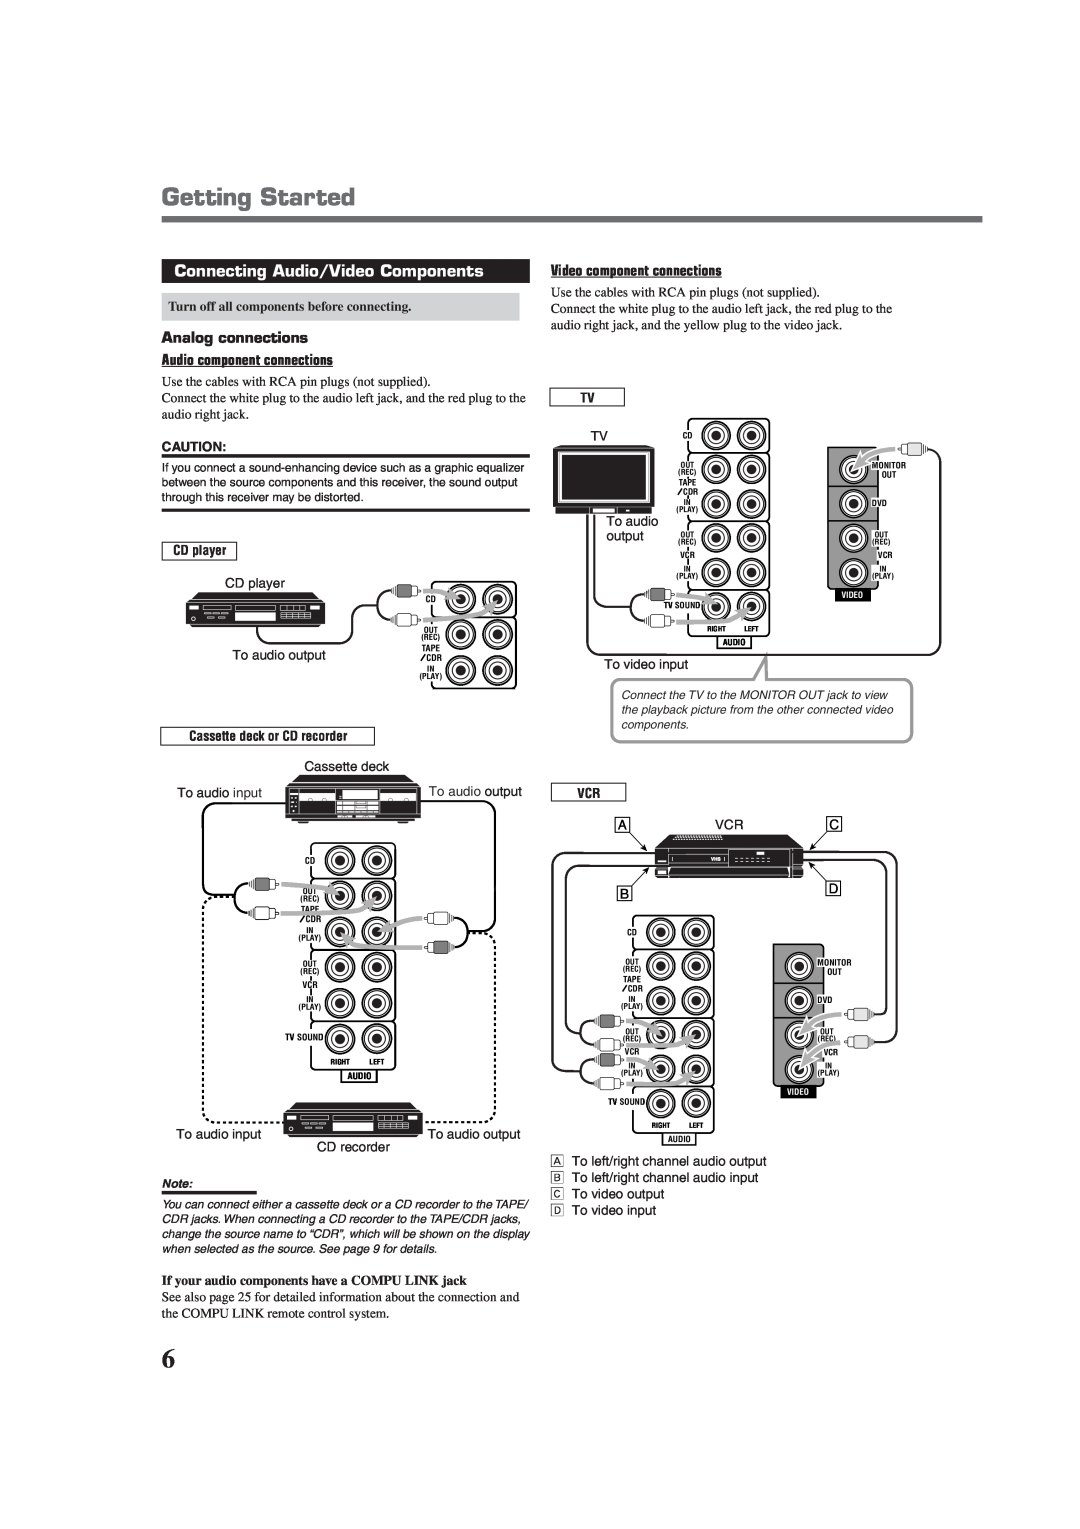 JVC RX-6020VBK manual Getting Started, Connecting Audio/Video Components, Analog connections Audio component connections 